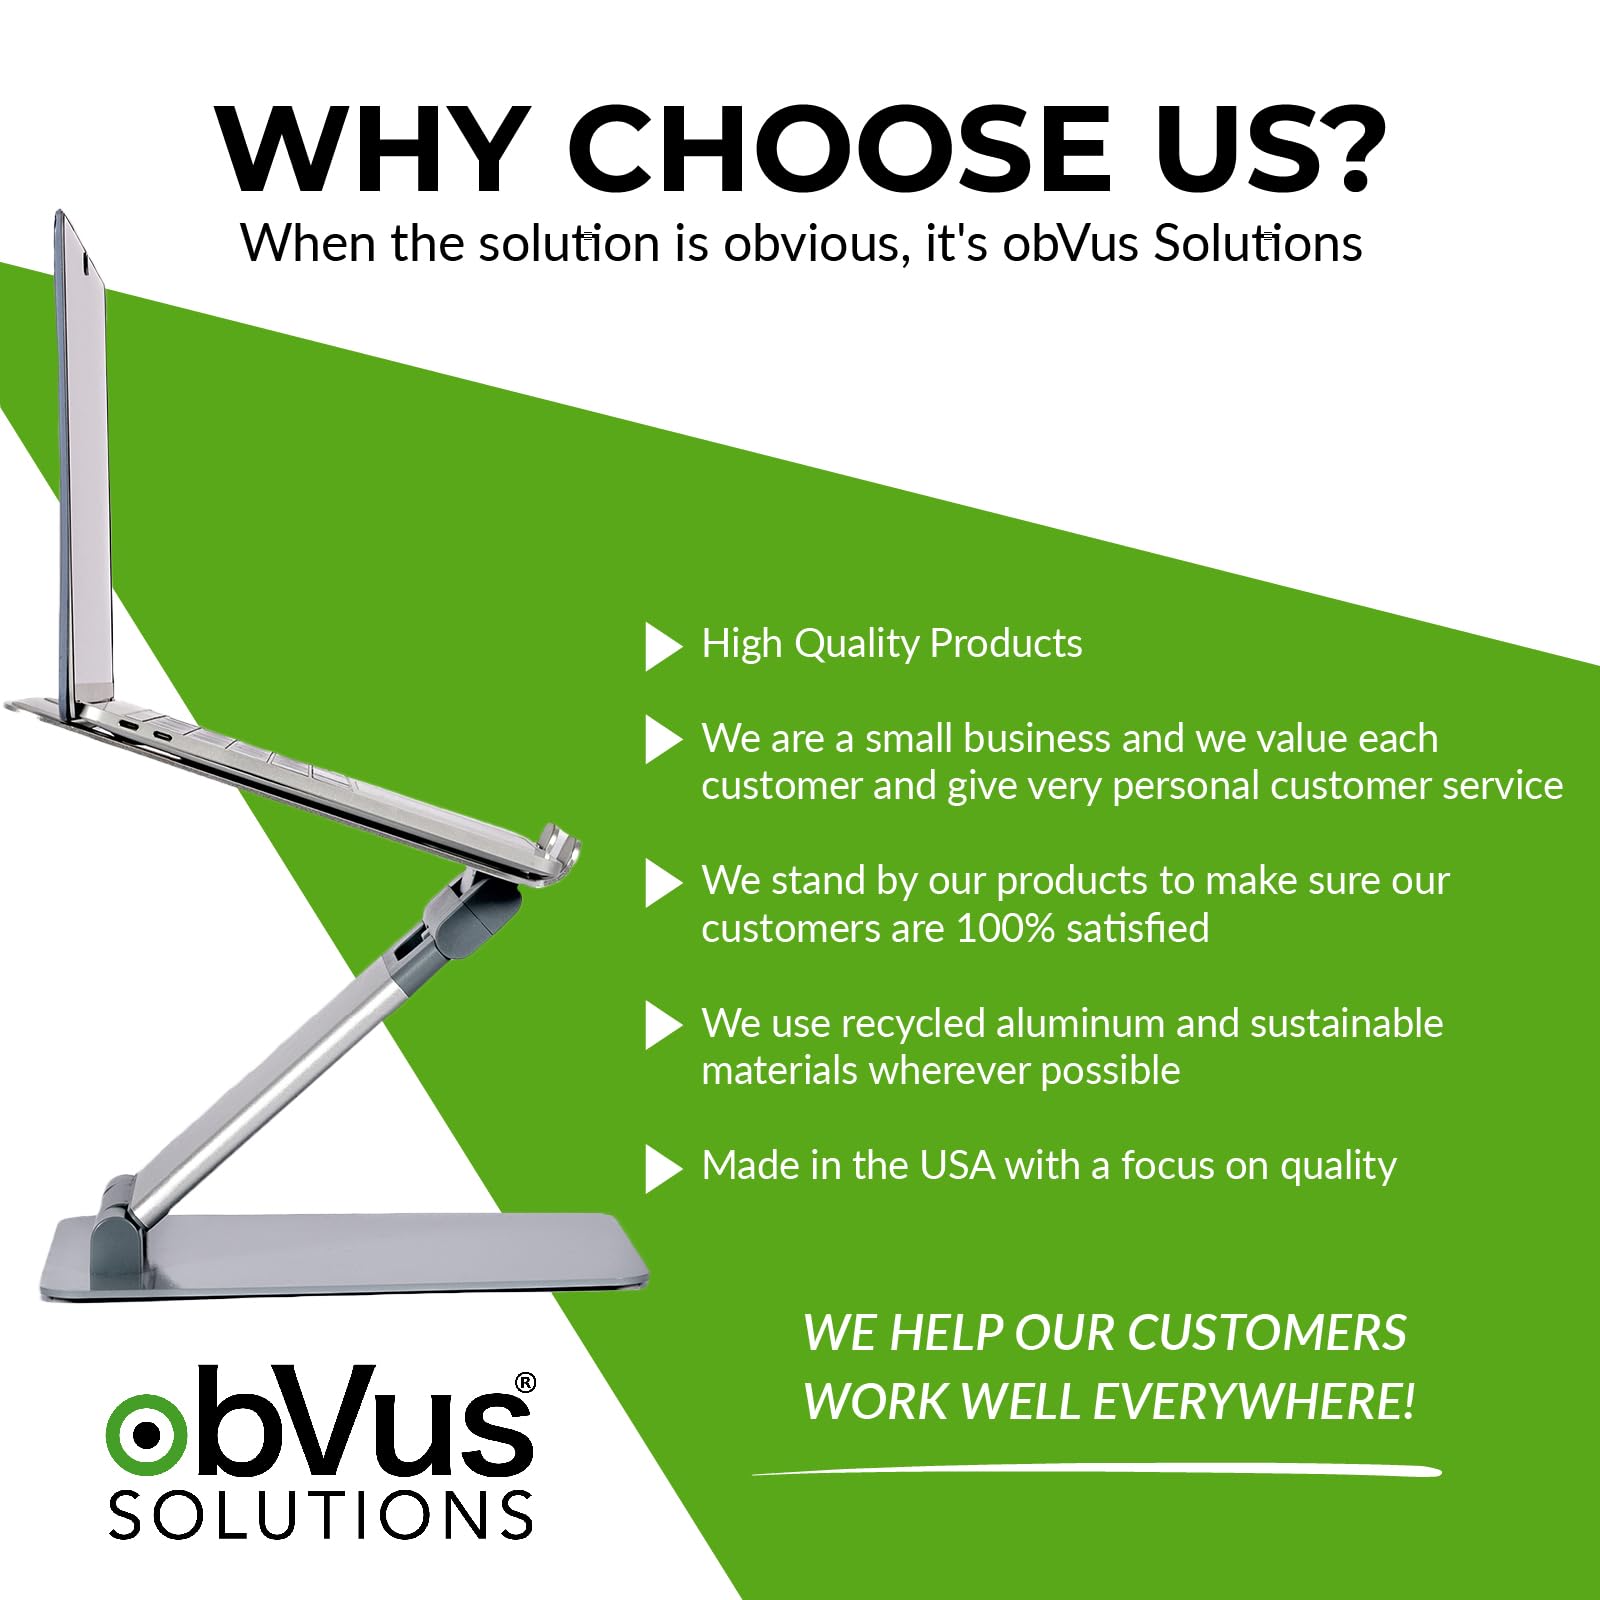 obVus Solutions Adjustable Laptop Tower Stand | Multiple Awards from Top Technology, Business and Health Magazines | Sitting to Standing in Seconds | Reduce Back and Neck Pain | Made in The USA